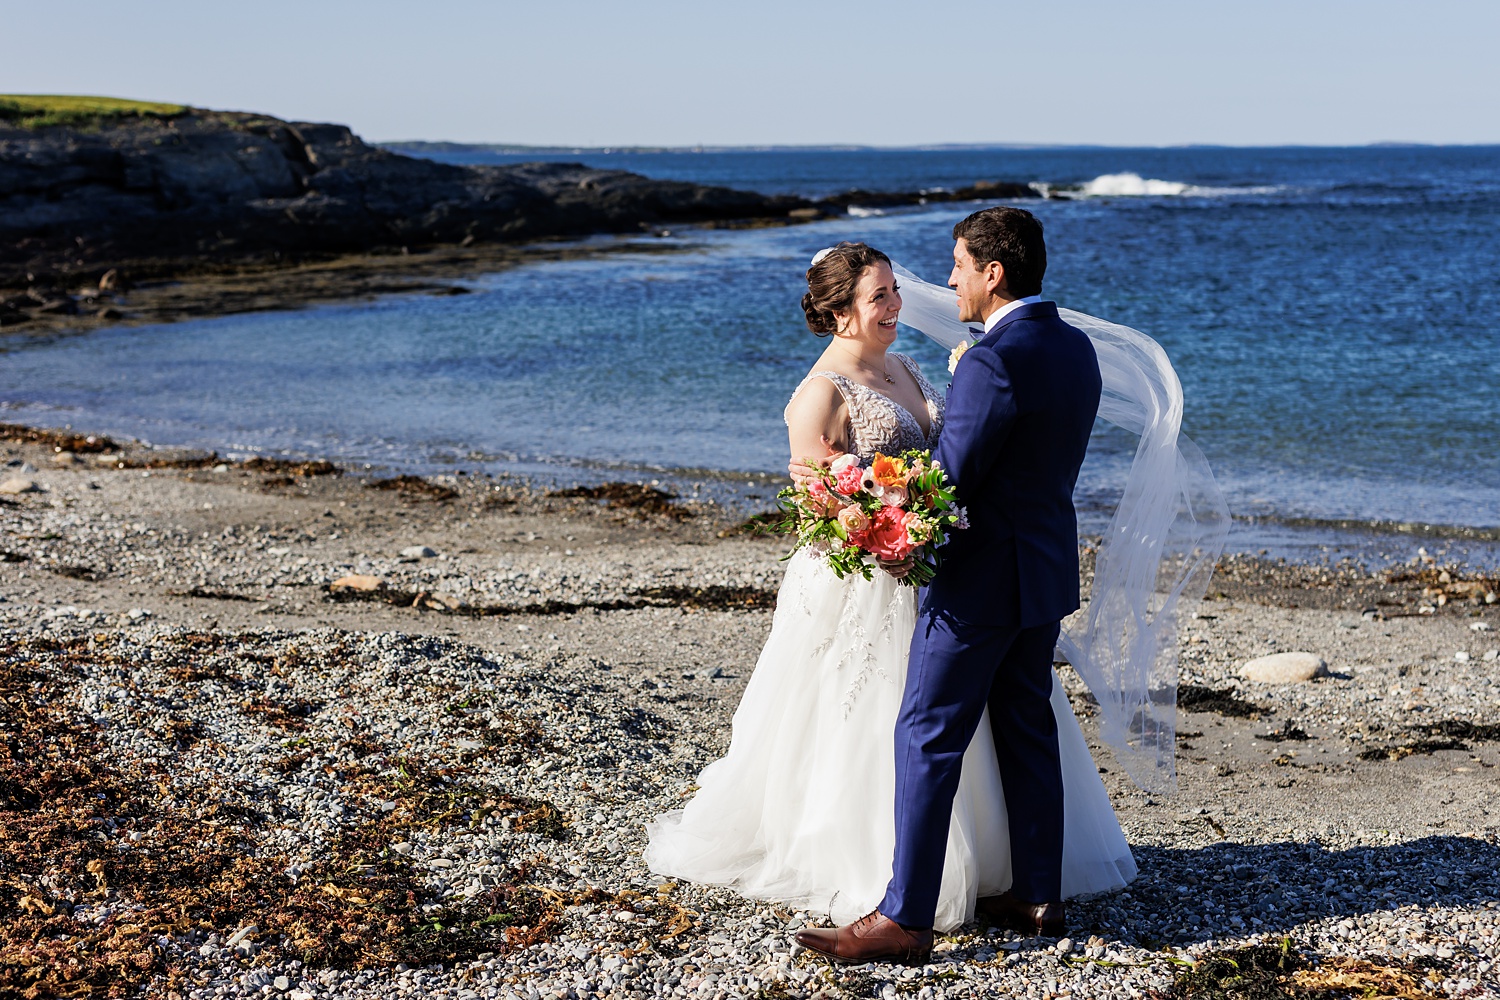 Trundy Point in Cape Elizabeth Maine with the bride and groom on their wedding day